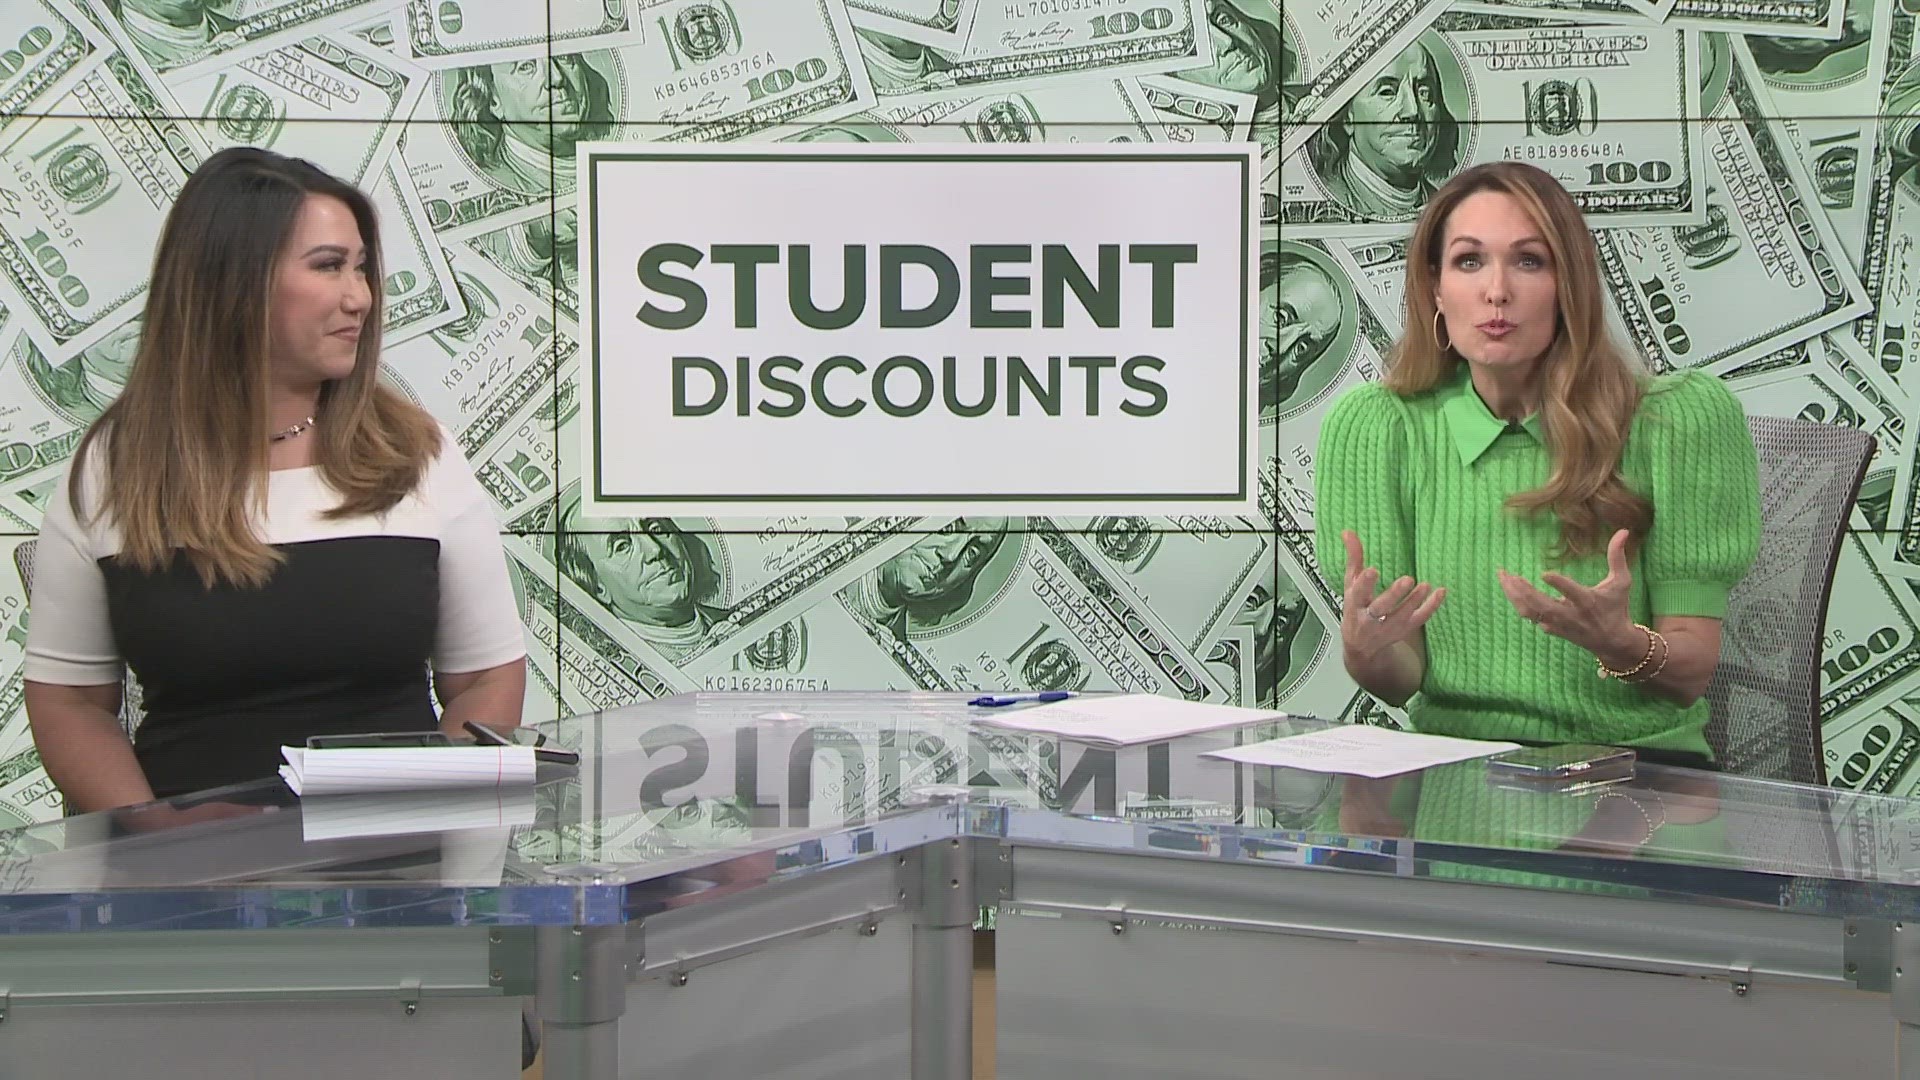 College life can be stressful and living on a budget can take a toll, but there are lots of discounts for students, you just have to know where to find them.